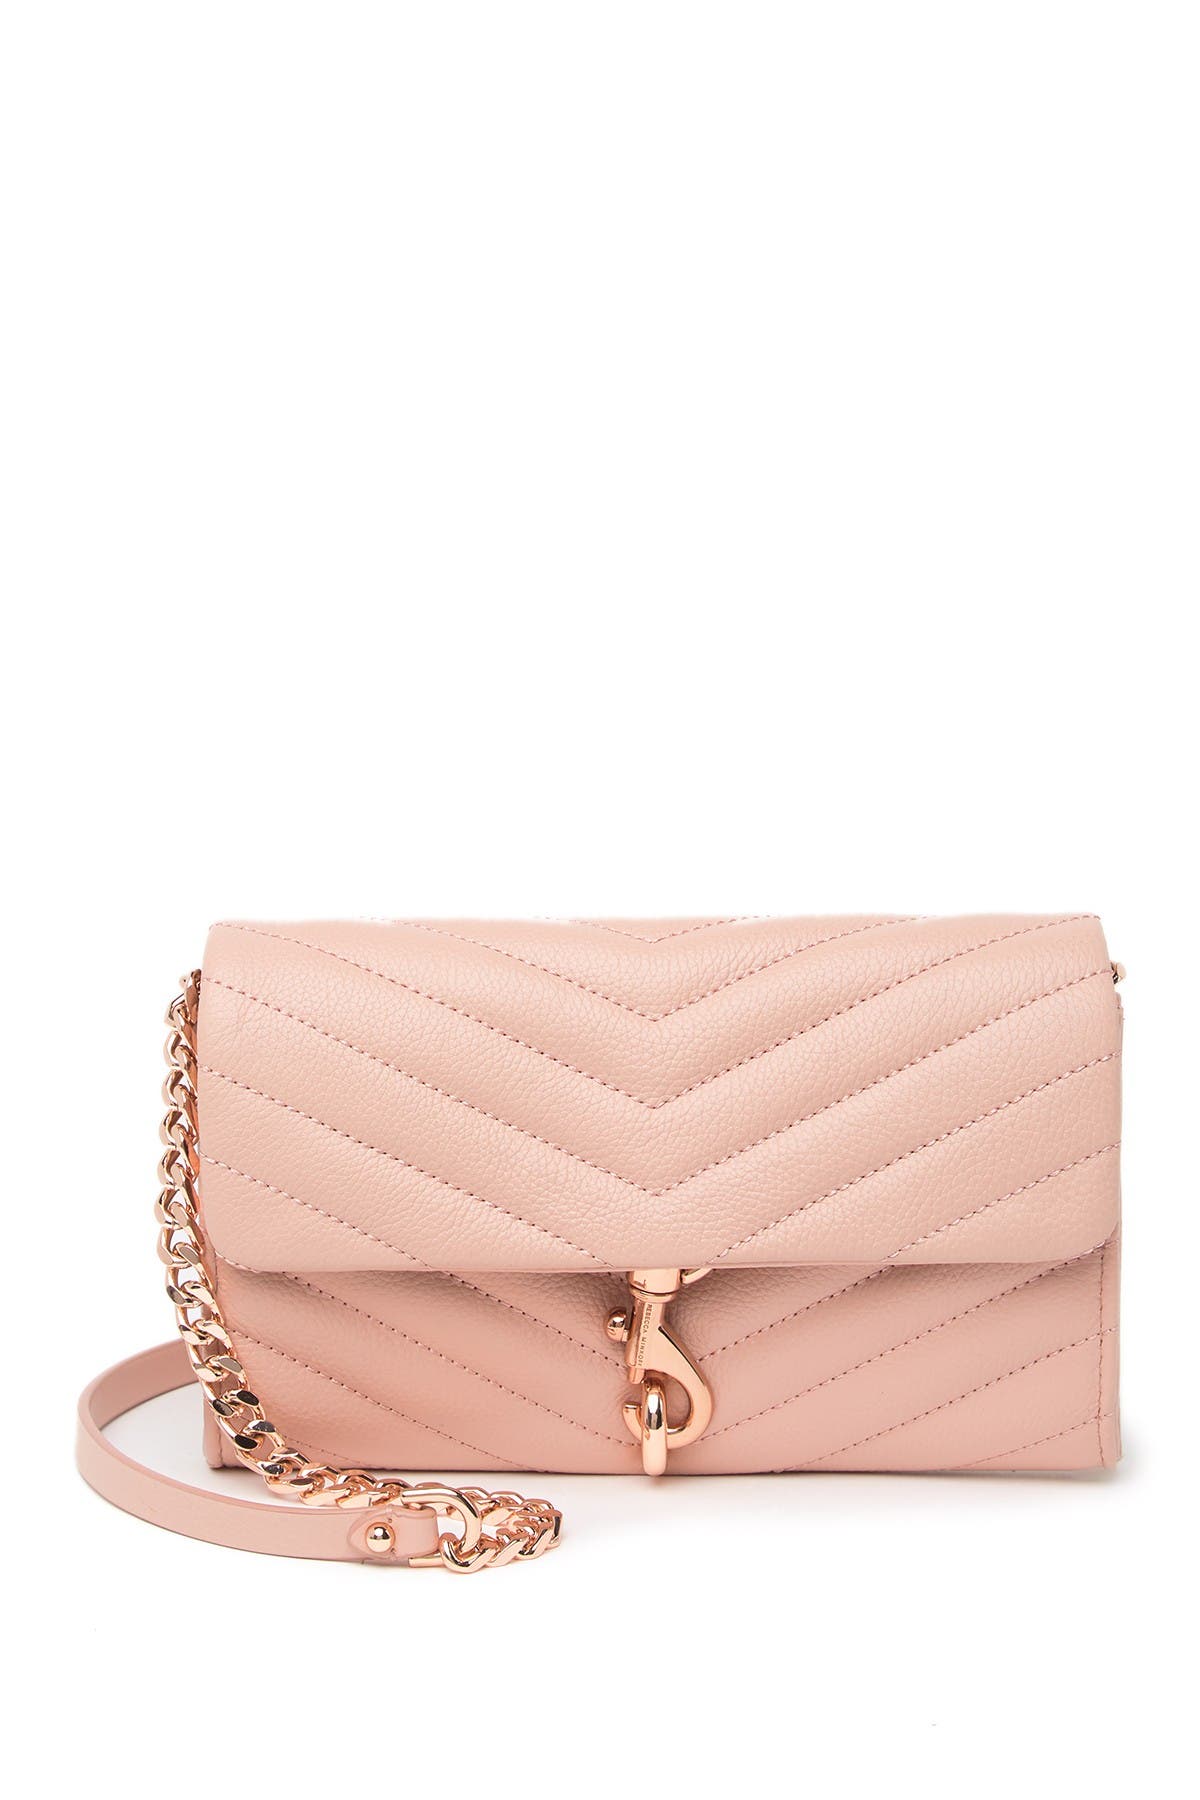 Rebecca Minkoff Edie Leather Wallet On A Chain In Light/pastel Pink9